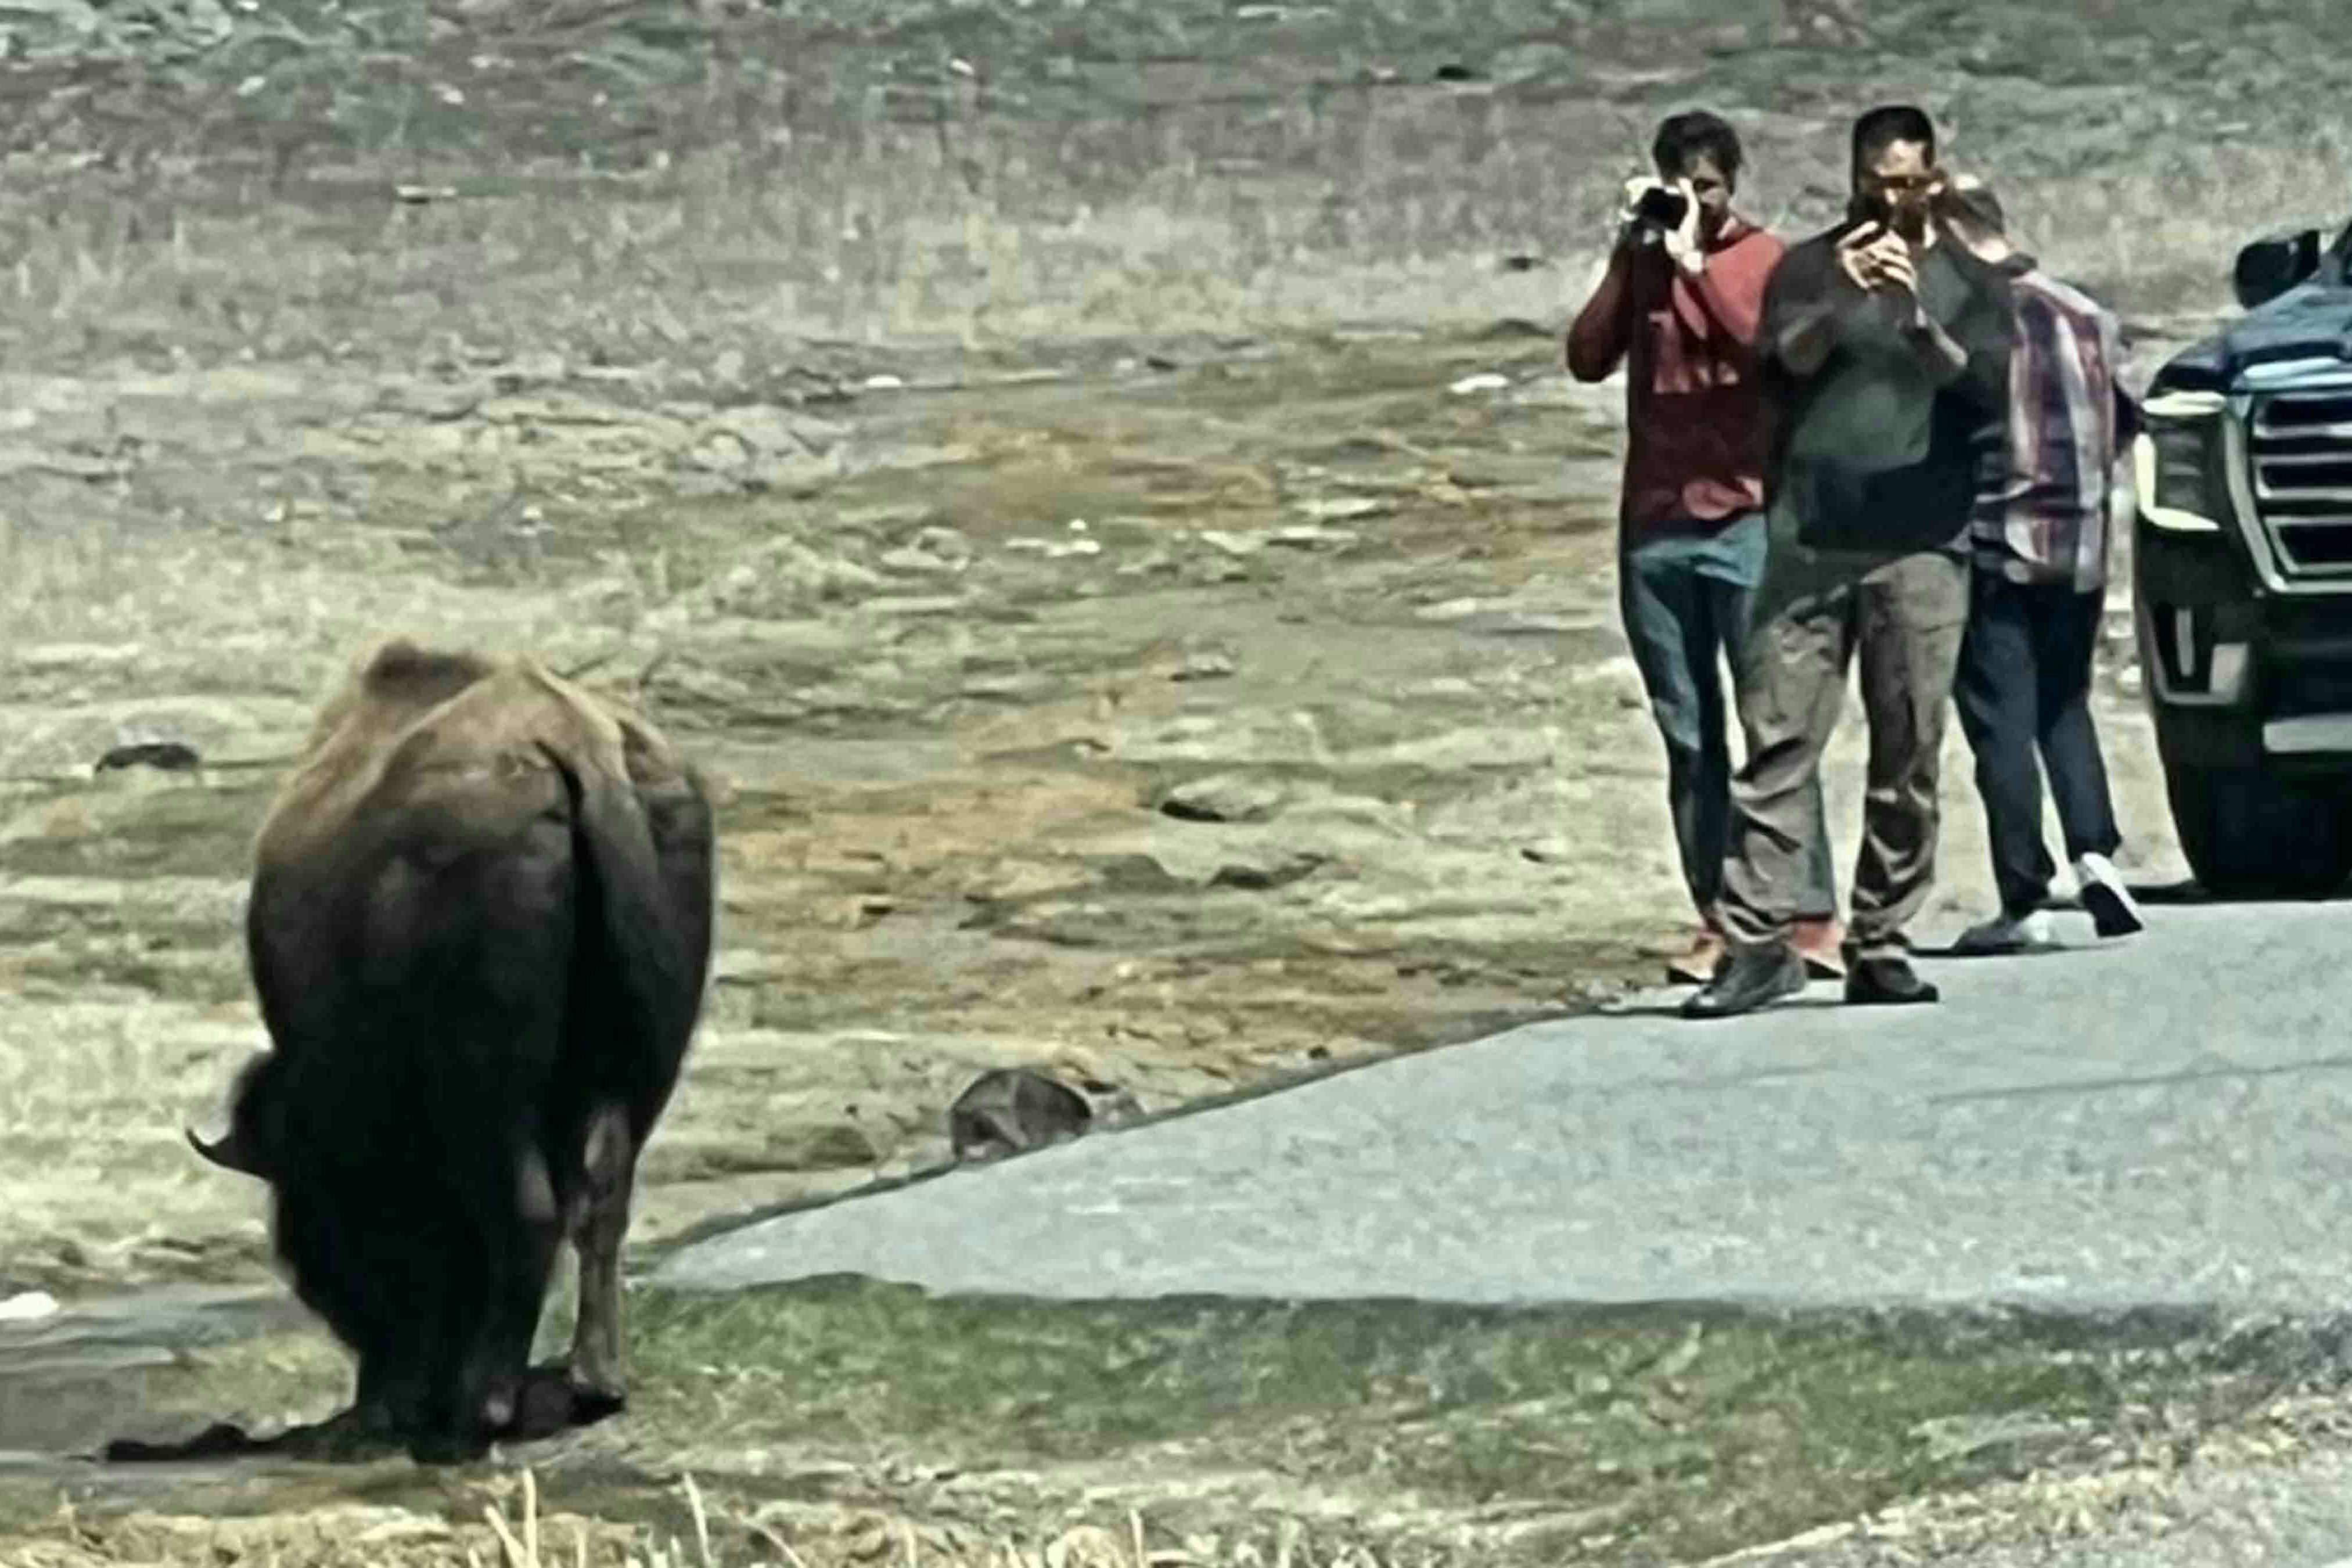 The 2024 tourist season has just begun in Yellowstone, and there are already plenty of incidents of people getting too close to wildlife, like in this recent file photo. On Monday, Yellowstone National Park annoucned the arrest of a man who not only allegedly harassed a herd of bison, he kicked one in the leg.